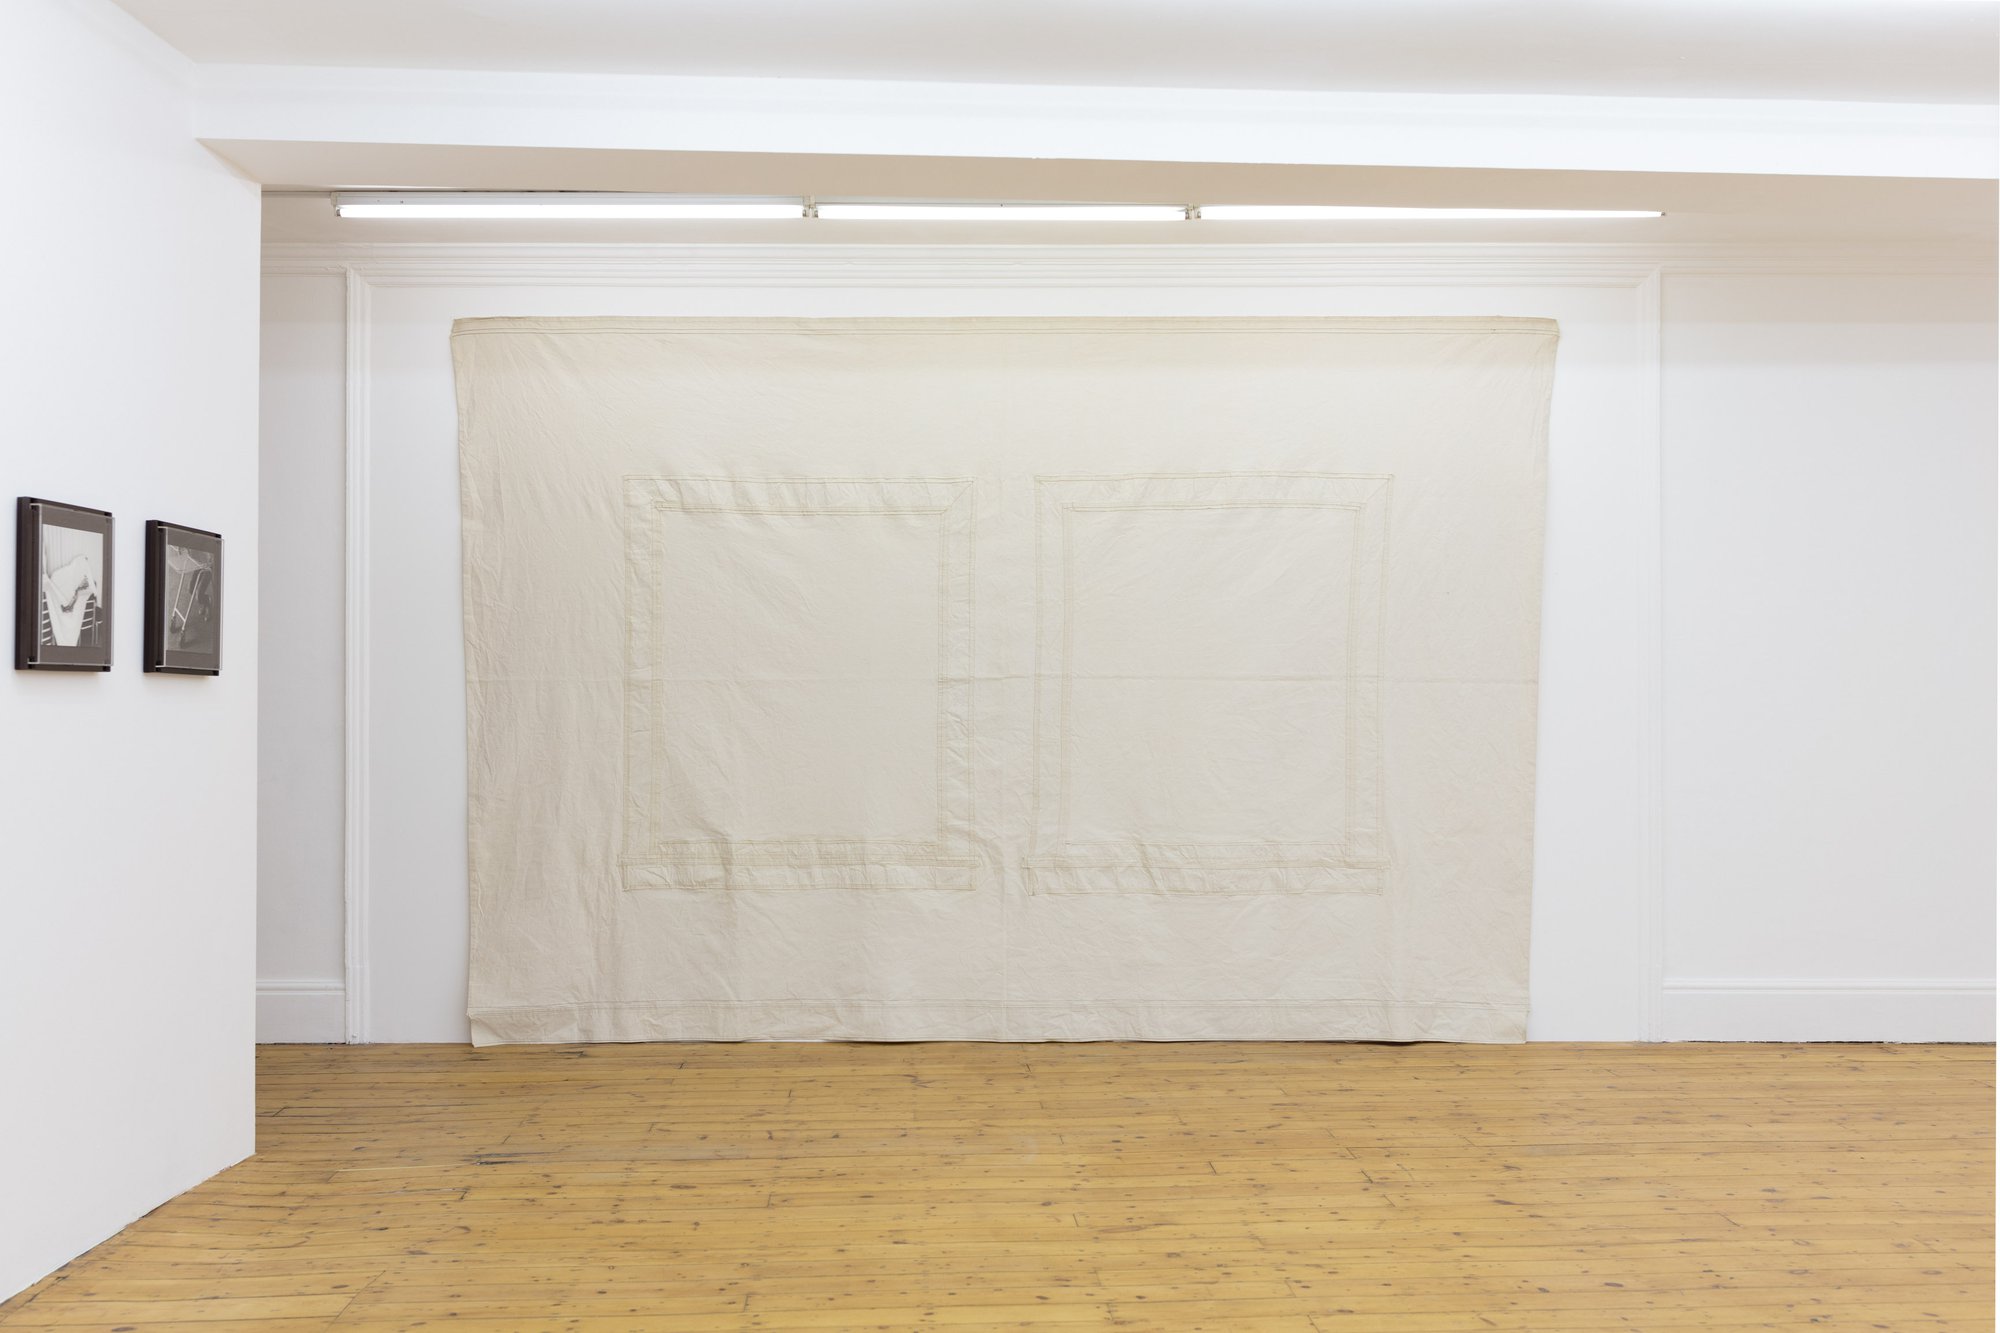 Robert Overby, Two Window Wall Map, 20 August 1972, canvas, 268 x 406.4 cm (105 1/2 x 160 in). Installation view, Condo: Rodeo / Andrew Kreps, Robert Overby / Ian Law, Rodeo, London, 2017